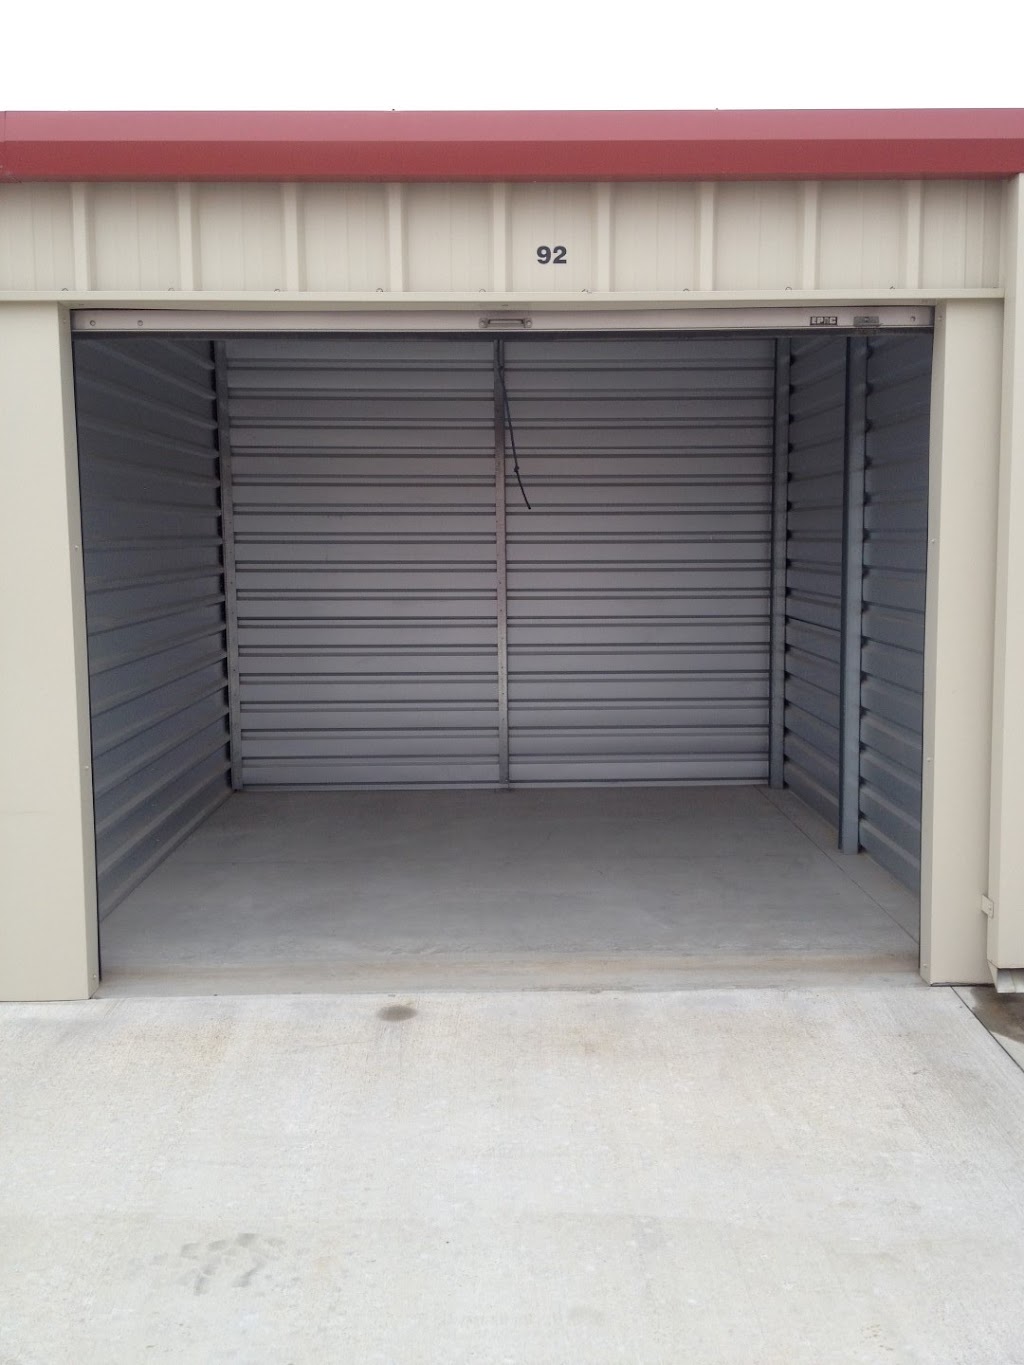 Purely Storage - Shafter | 120 S Beech Ave, Shafter, CA 93263 | Phone: (661) 746-1600